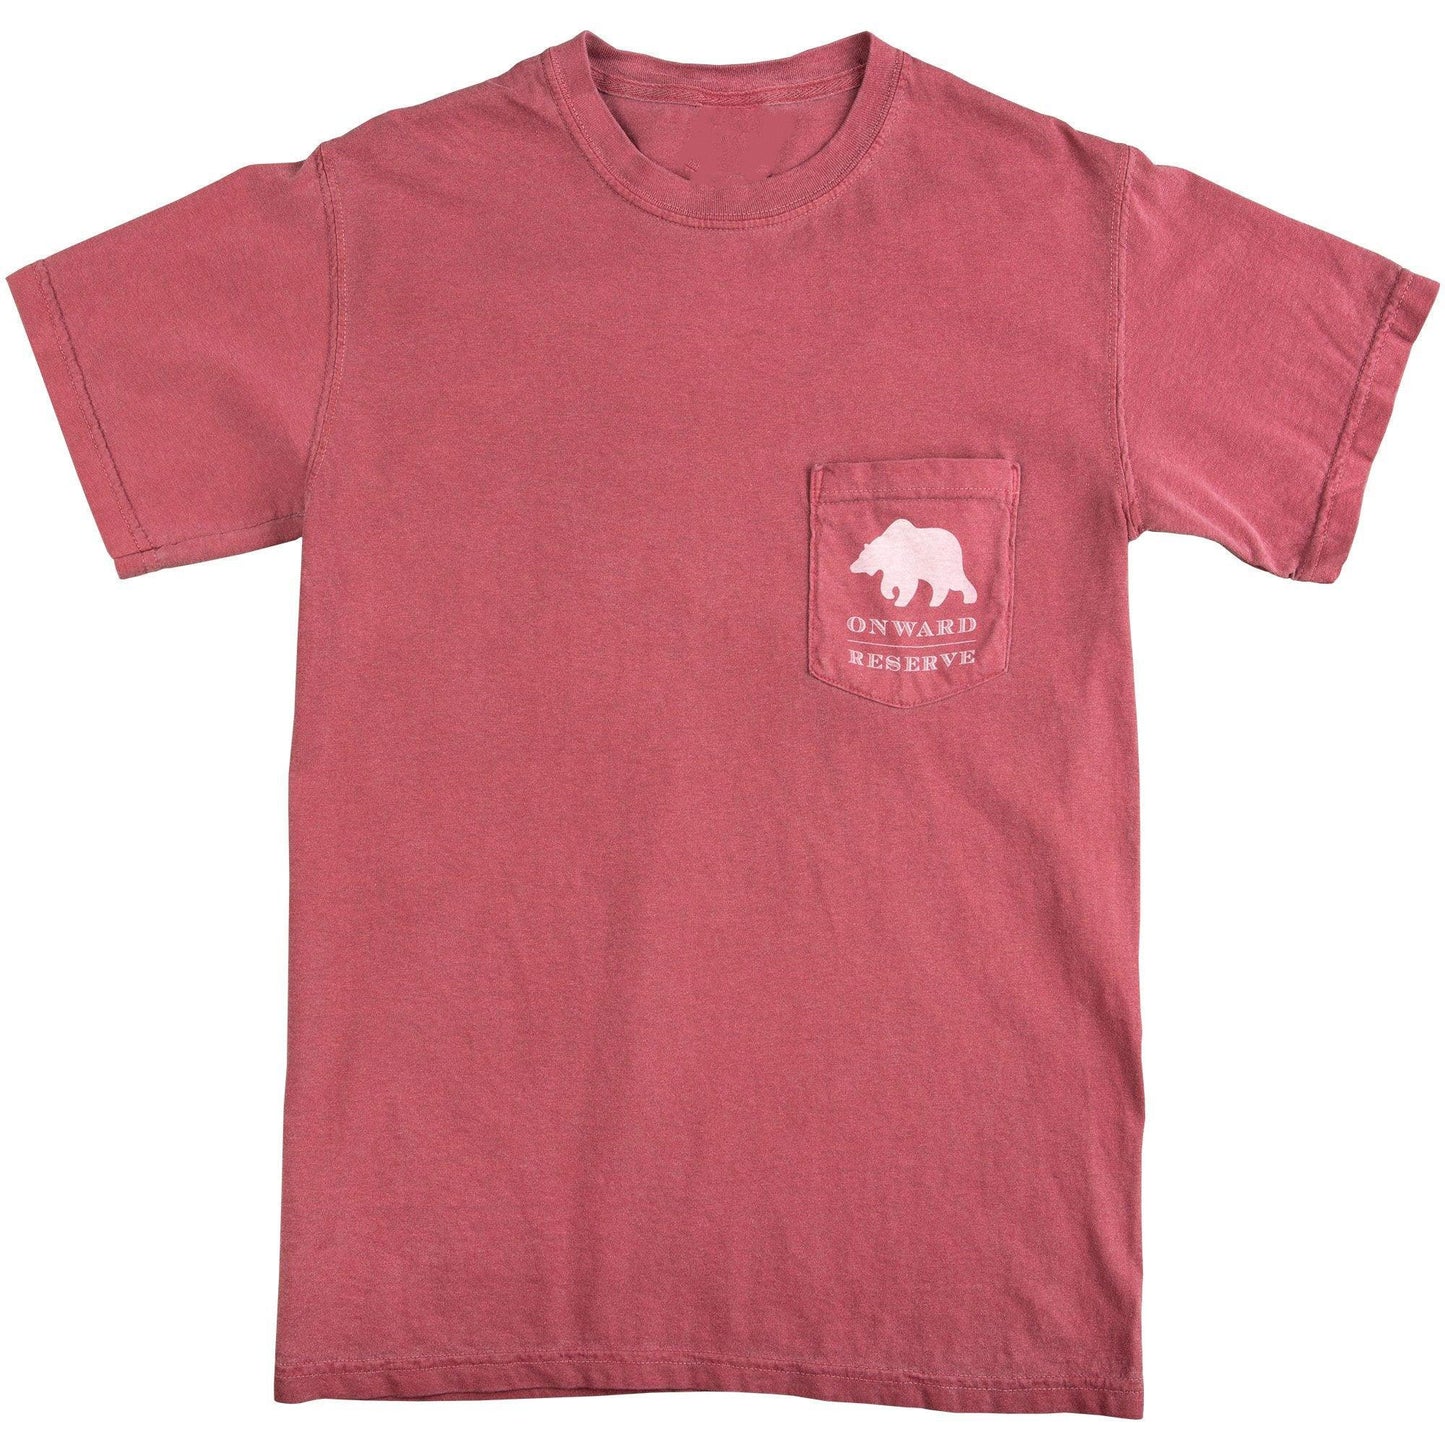 Brock Bowers Tee - Washed Red